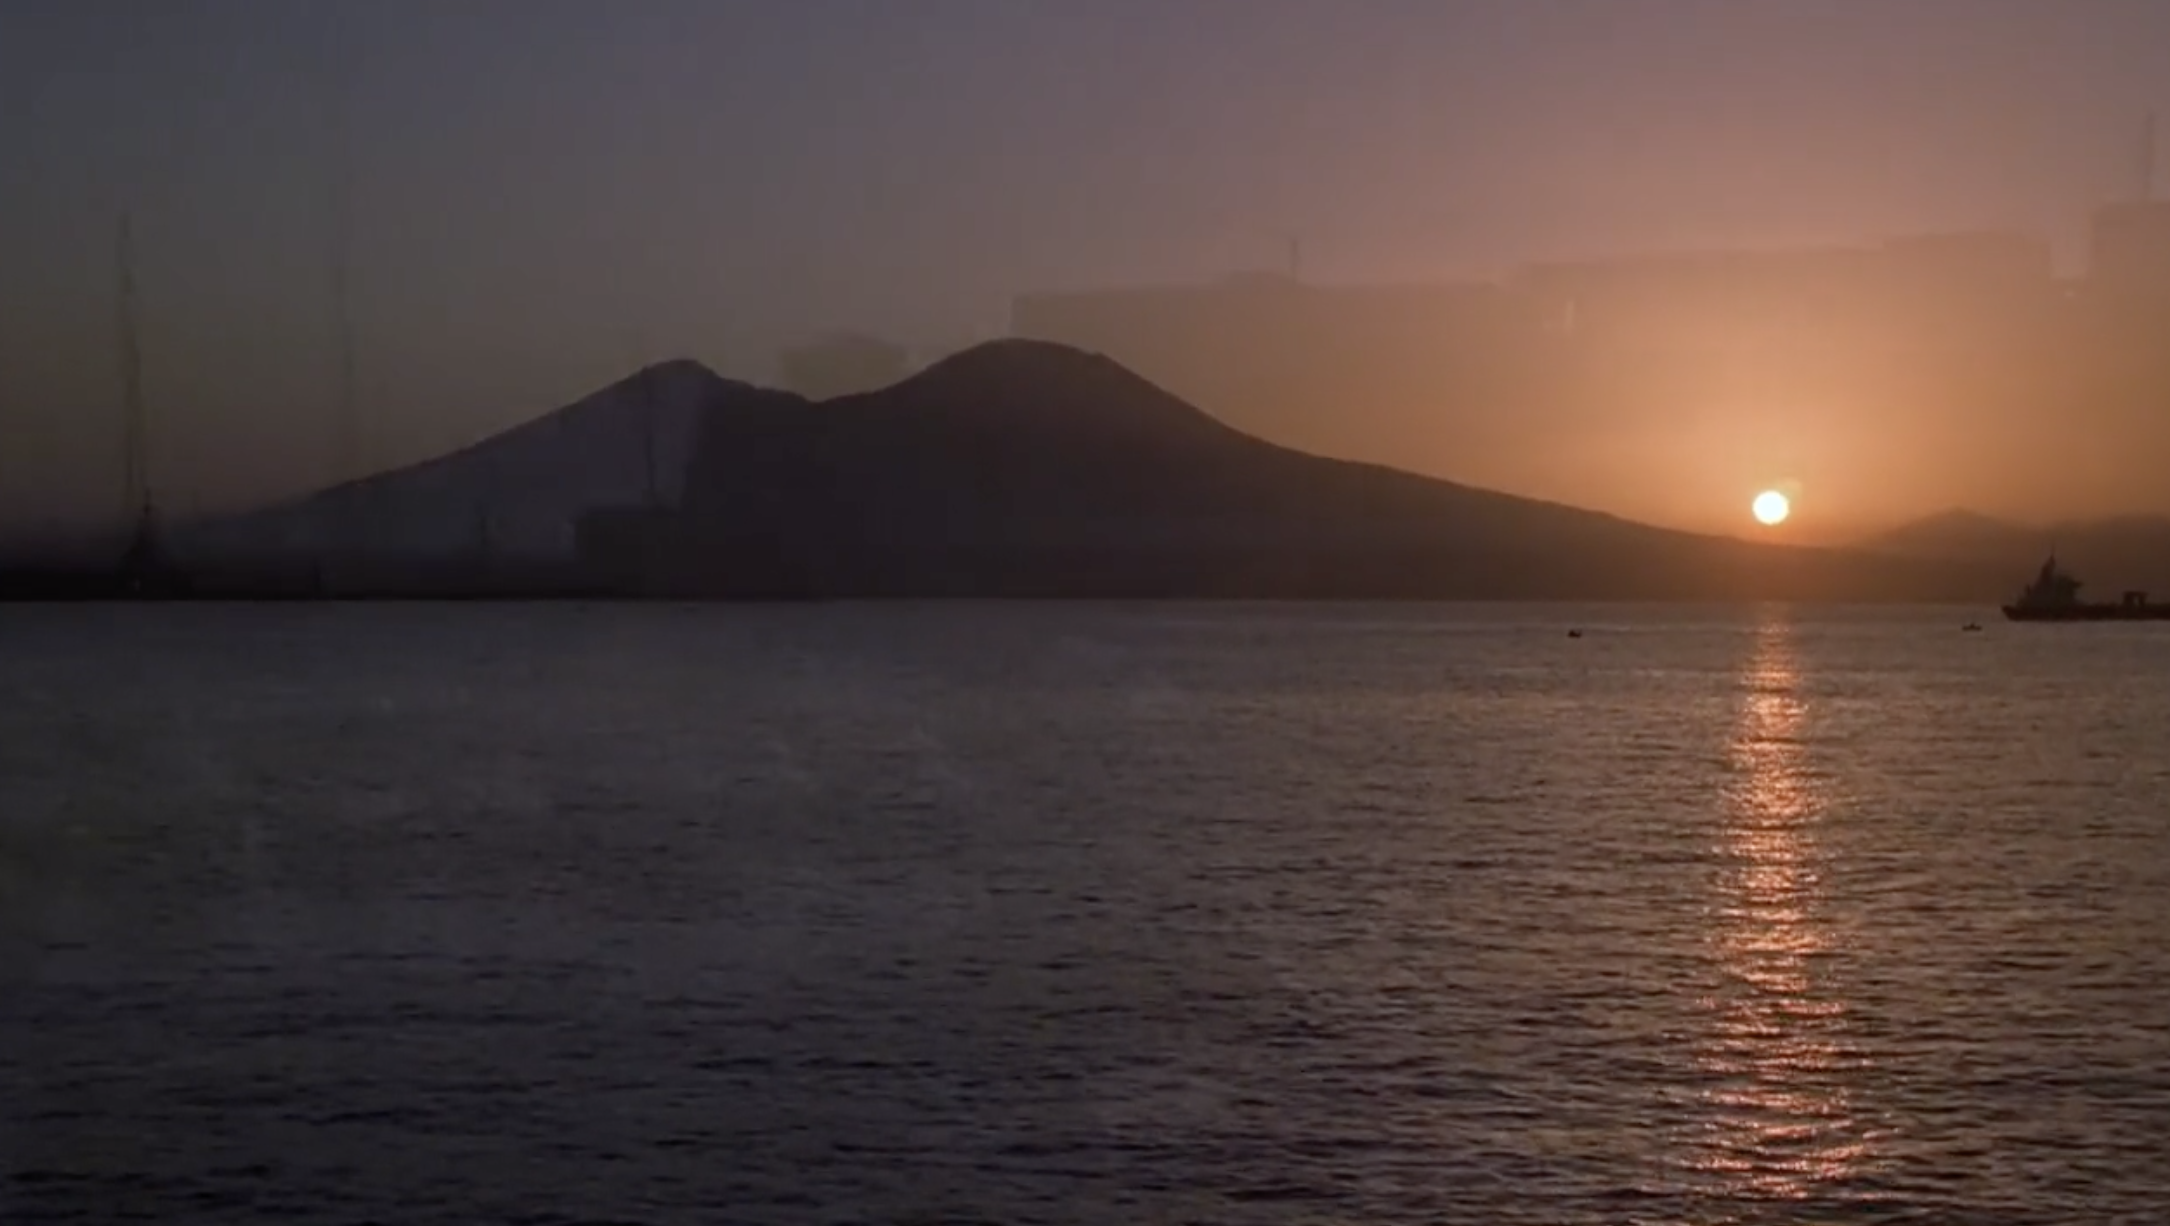 Image credit to HBO/Entertainment. Image of Vesuvius shot in Naples